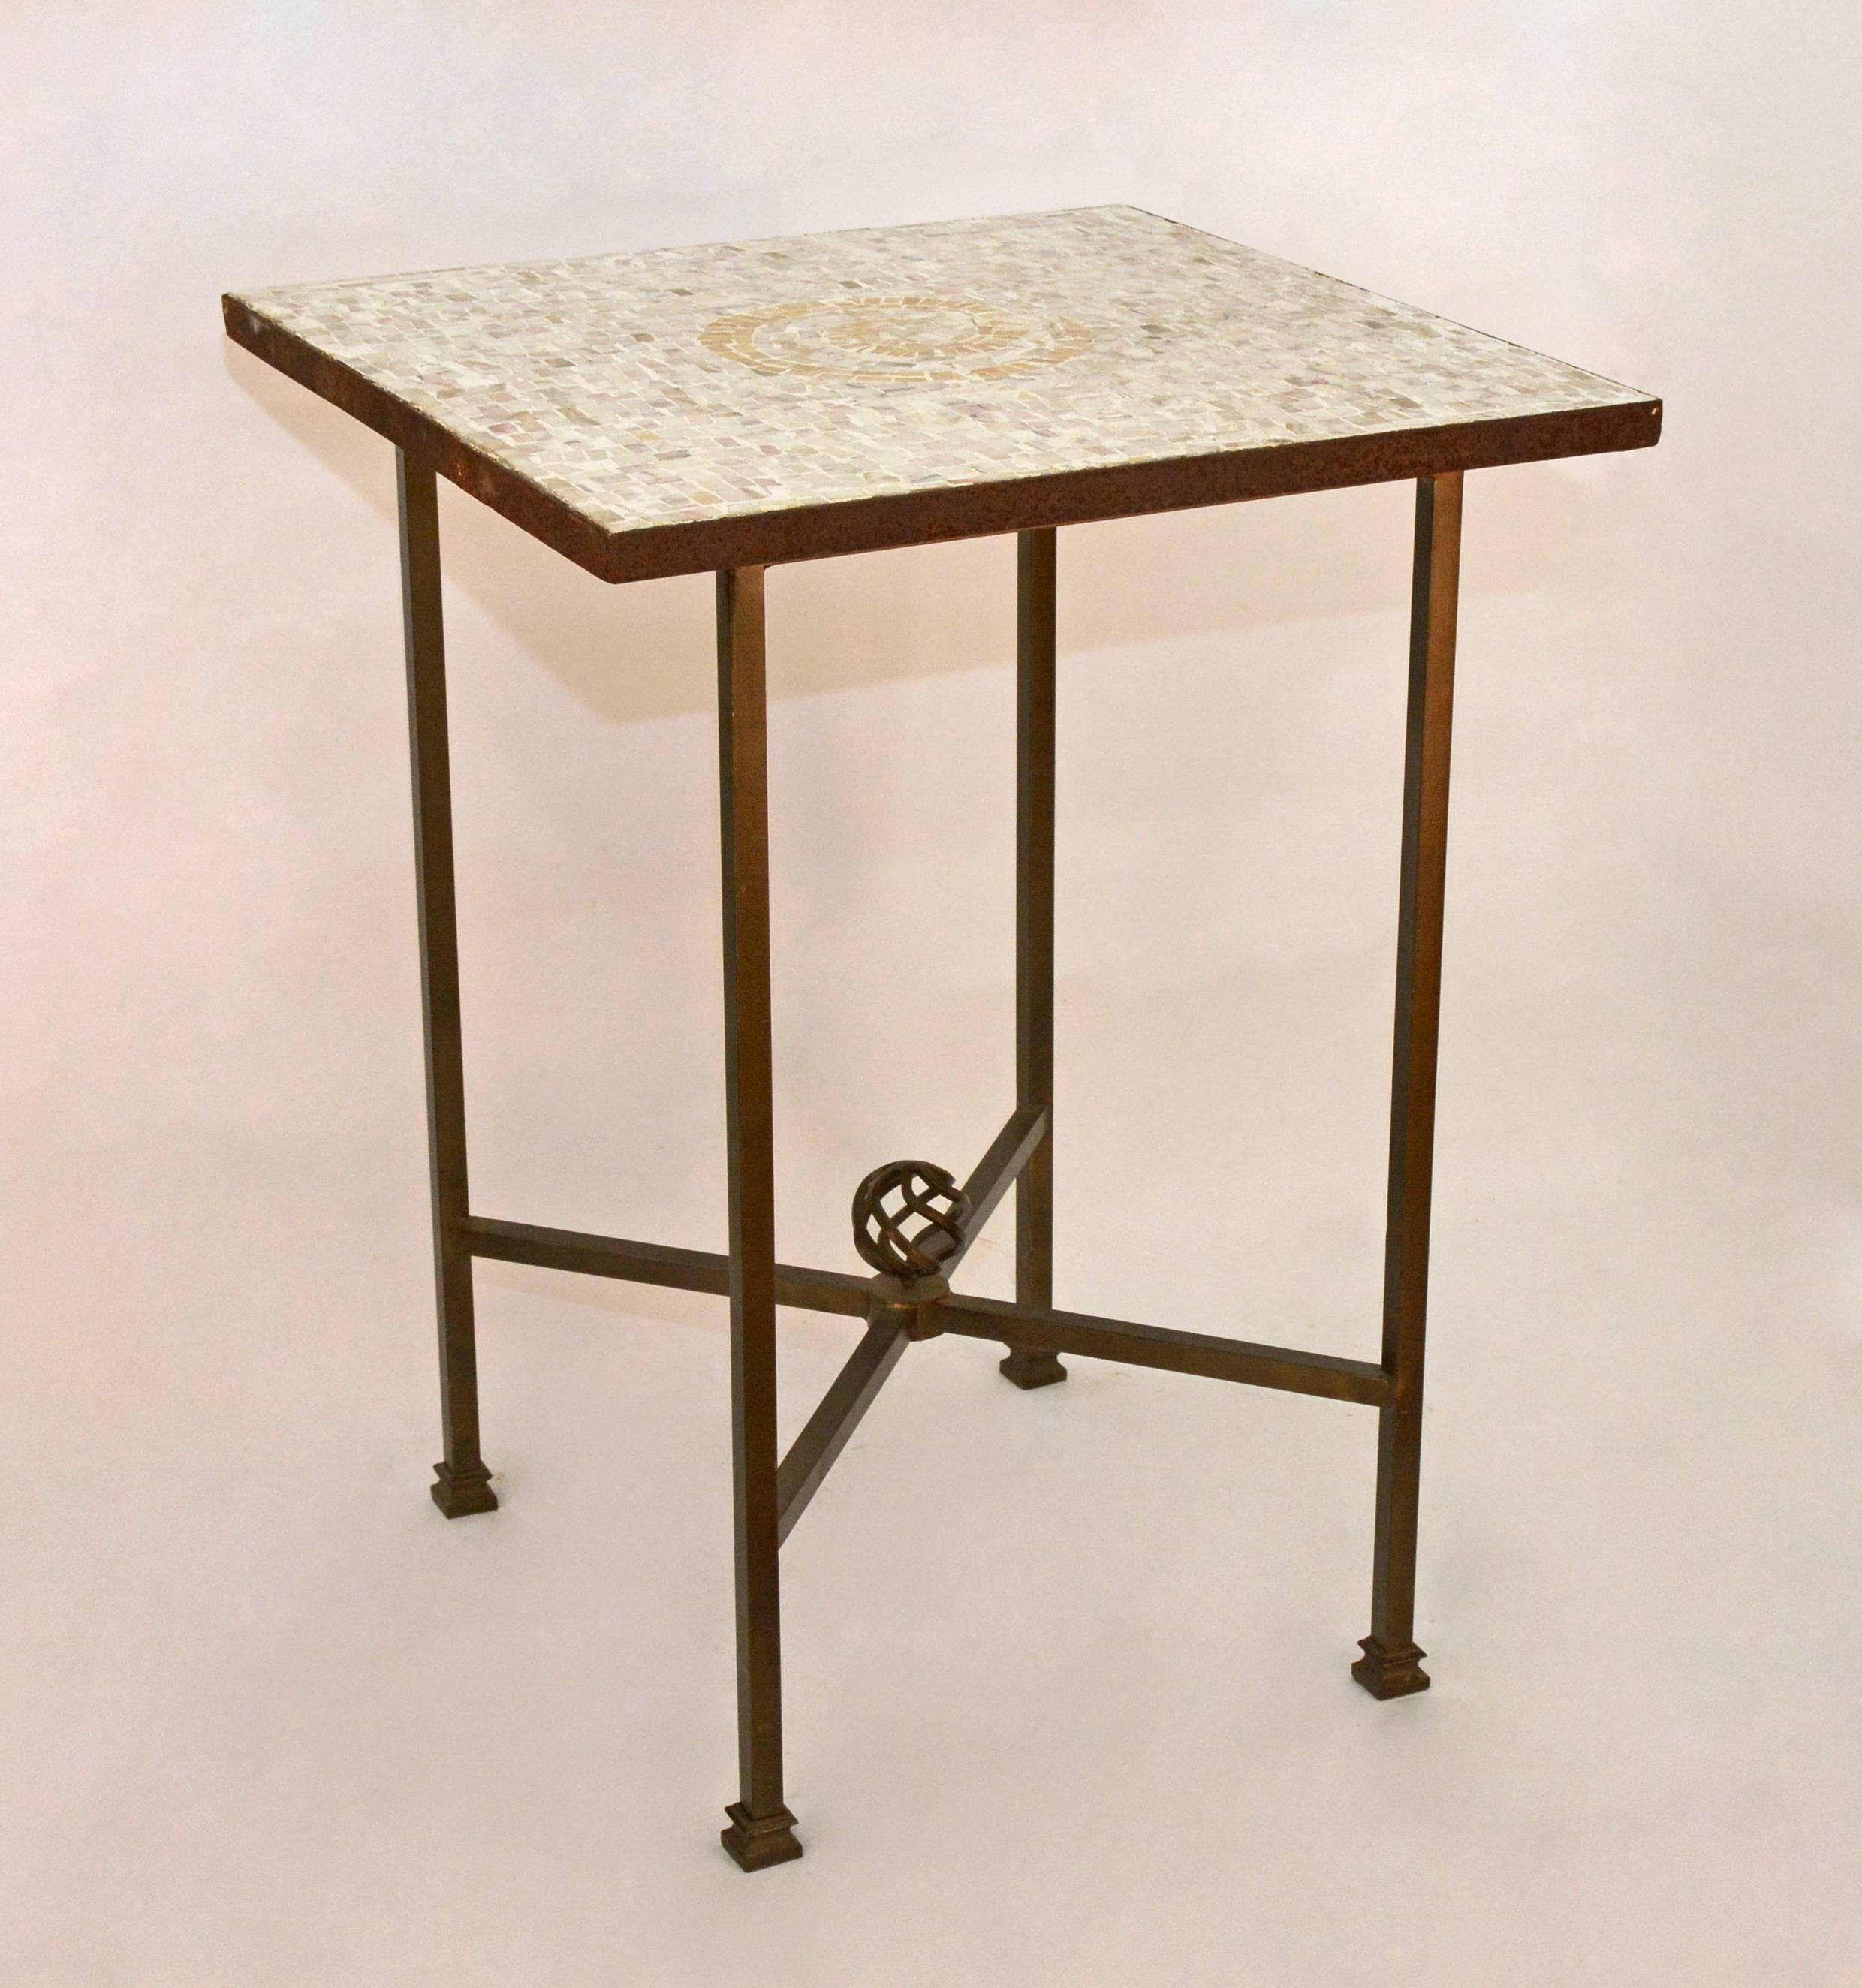 The mosaic top has inset tiles in pale shades of white, gray beige and taupe set within a iron square frame. The center design is a spiral shape in tan. The square bronzed colored base has criss-cross stretchers with a spiral finial in the center